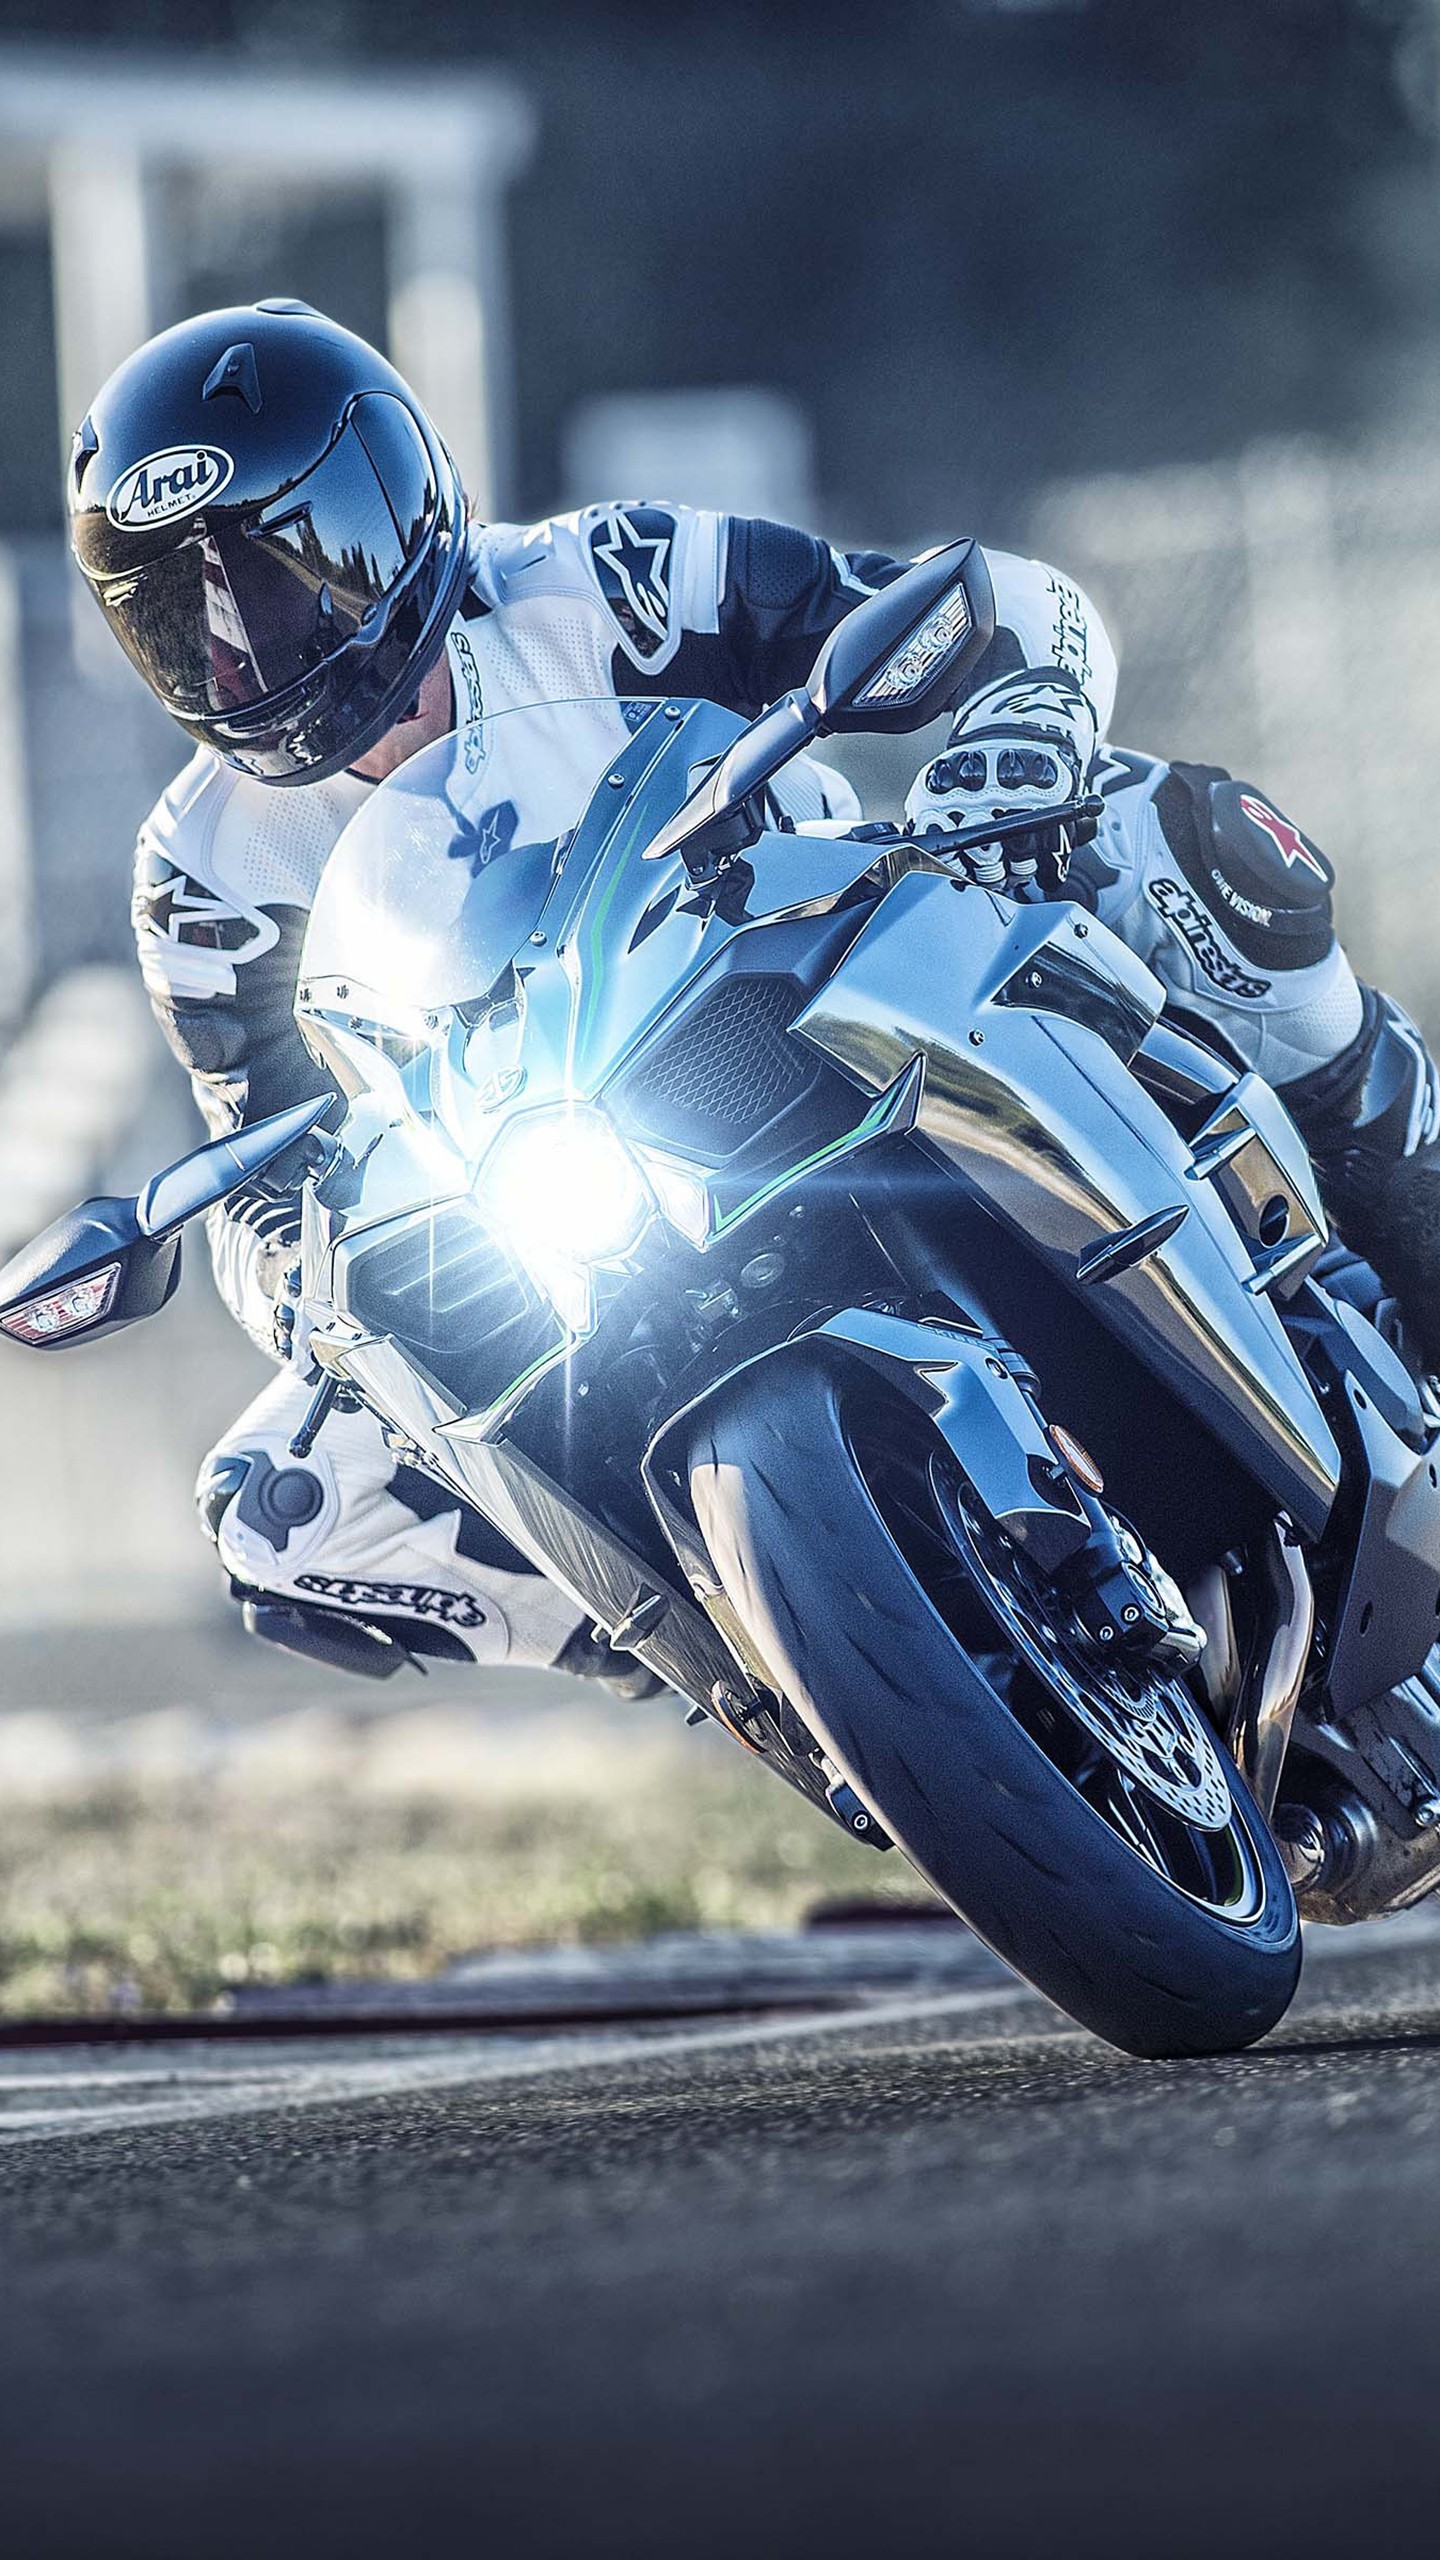 hd bikes wallpapers for android,motorcycle racer,motorcycle,motorcycling,road racing,vehicle